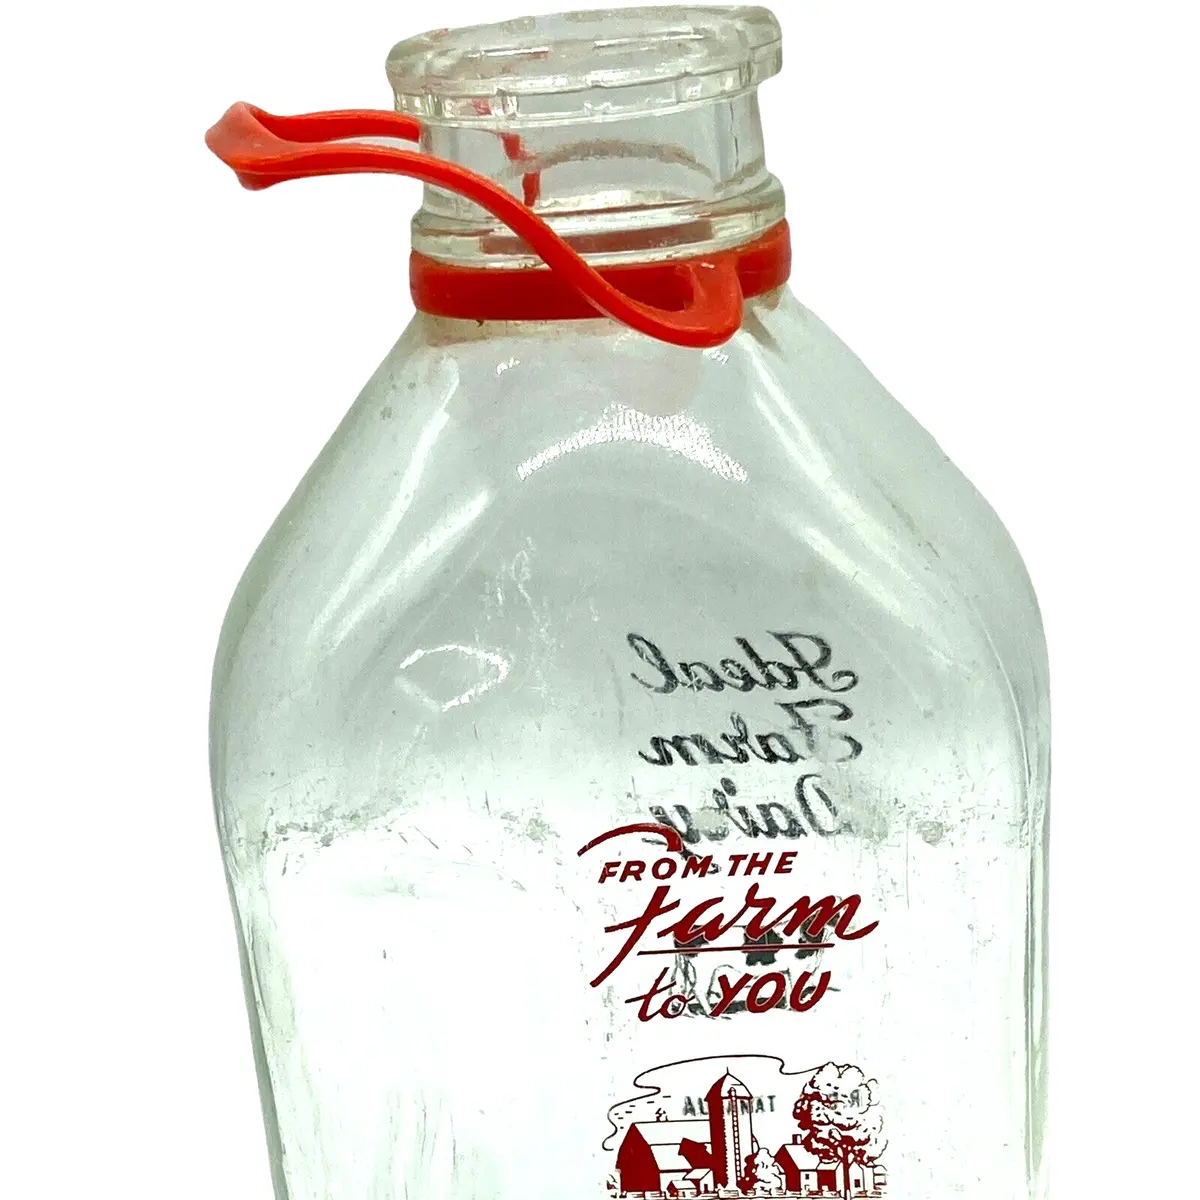 Vintage Old Clear Glass Milk Jug Ideal Farm Dairy 1967 Red Plastic handle  10